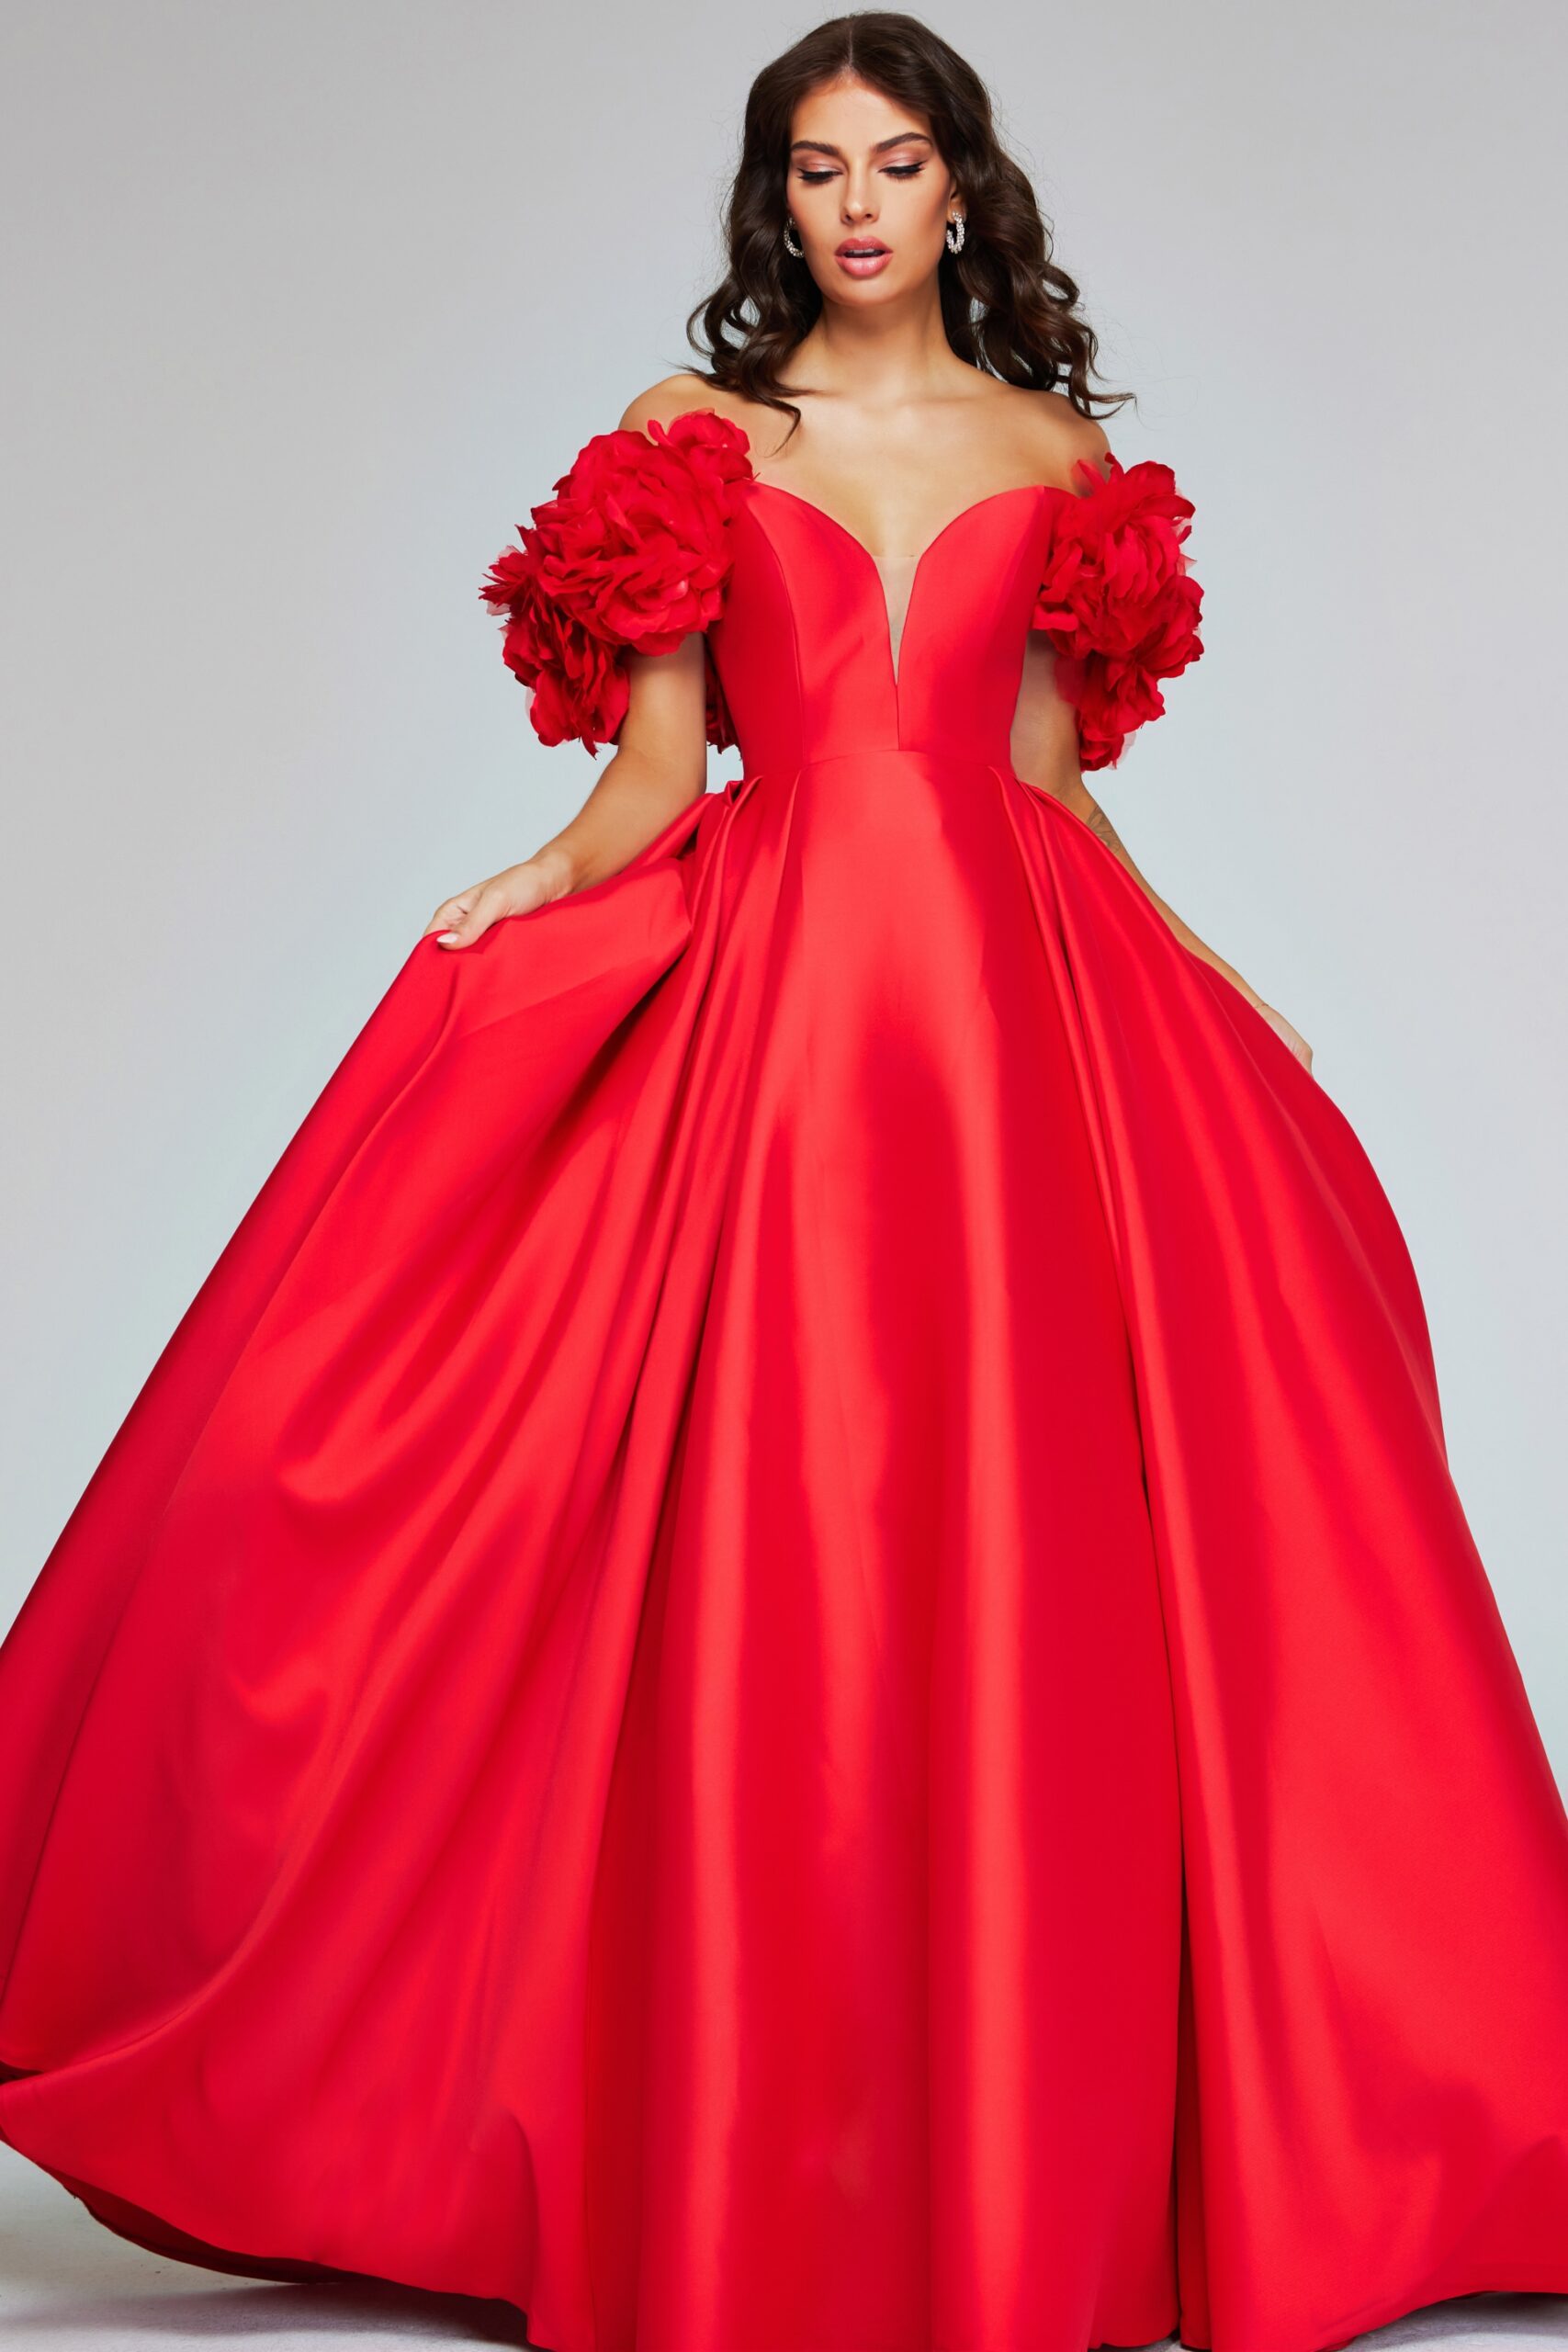 Bold Red Gown with Floral Puff Sleeves and Plunging Neckline 40794